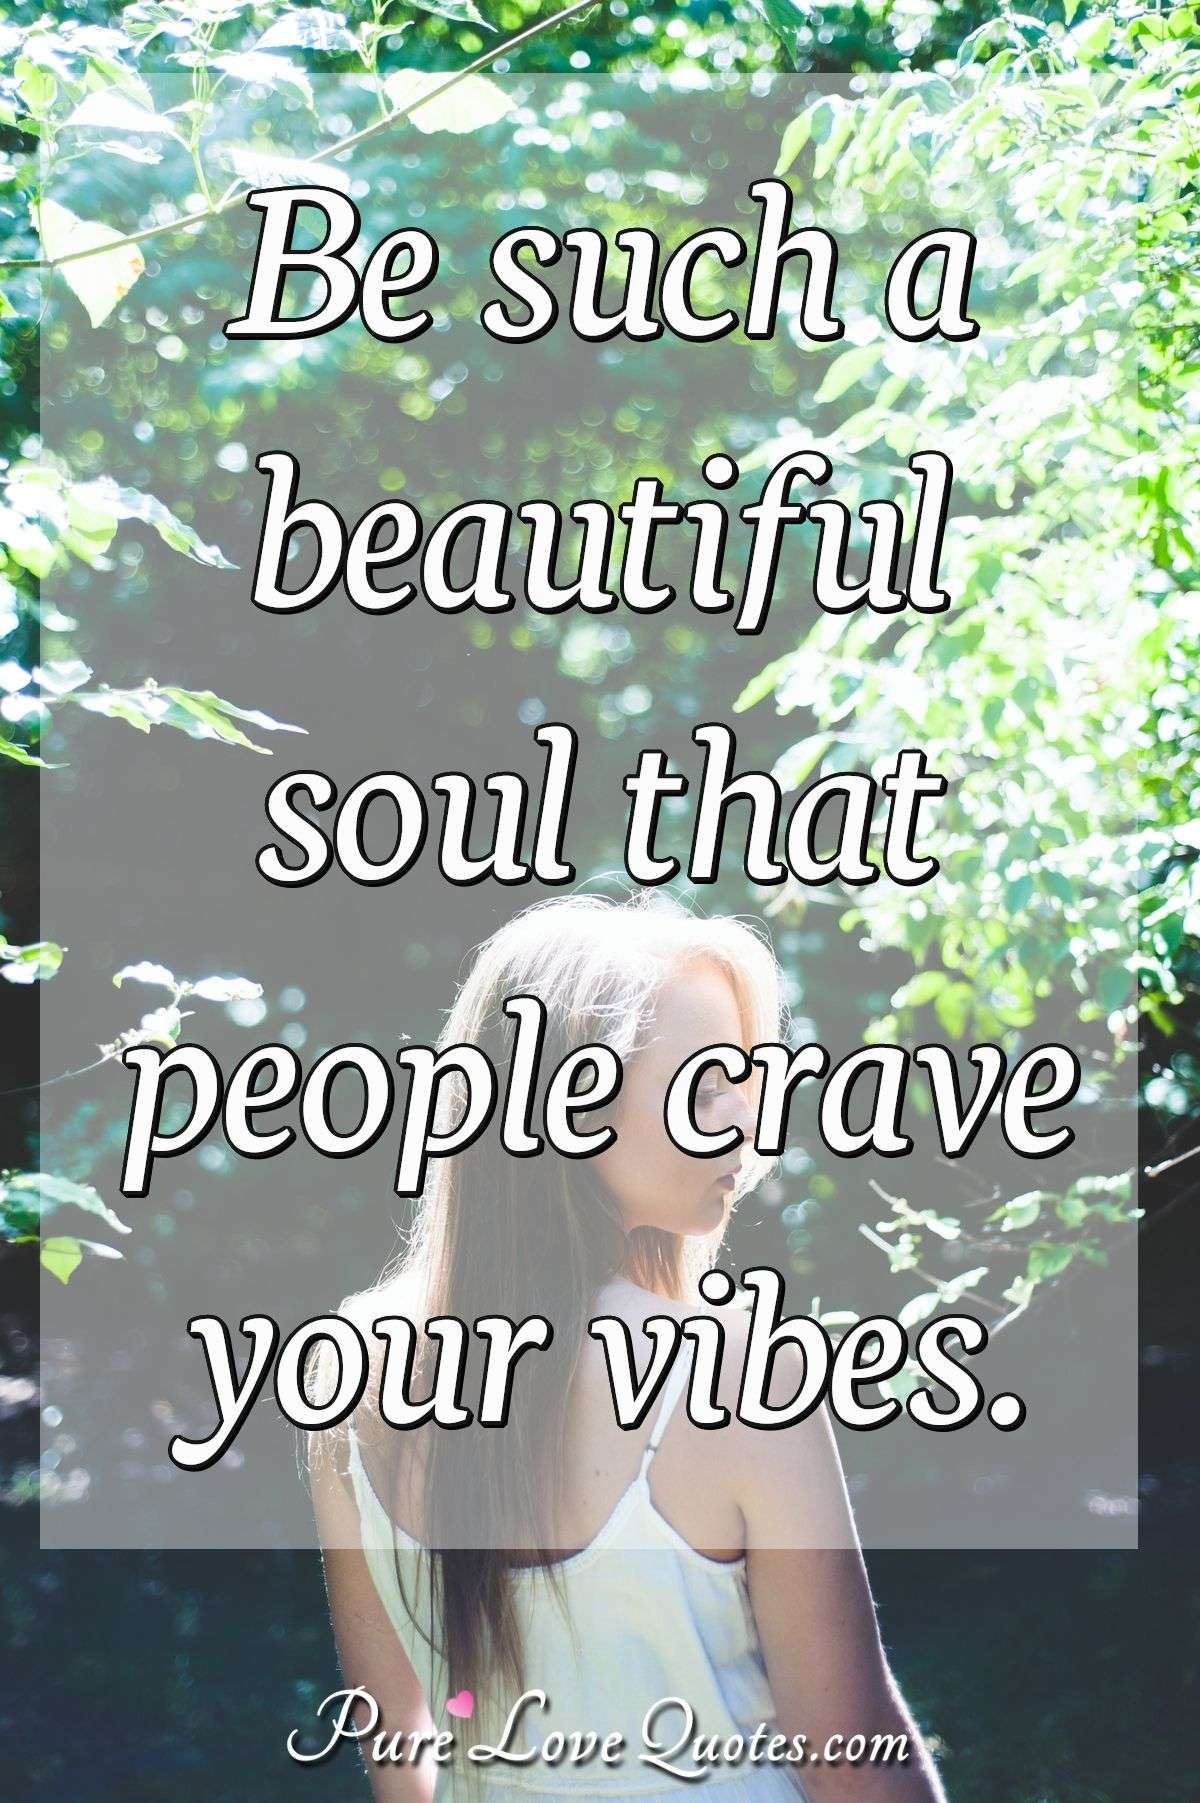 Be such a beautiful soul that people crave your vibes. - Anonymous